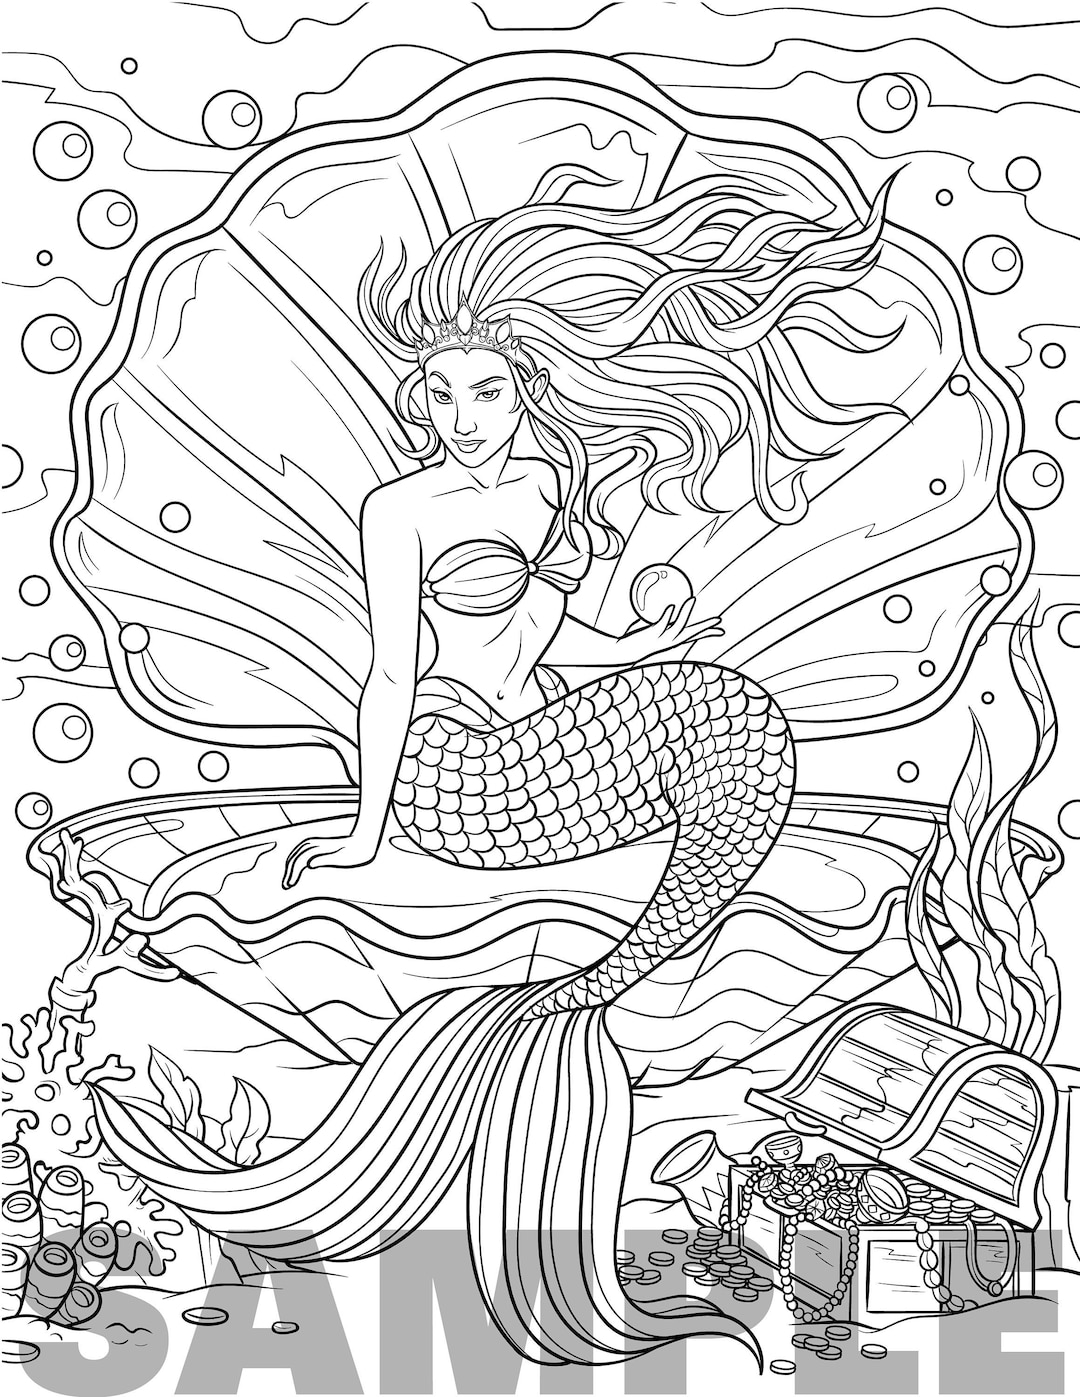 mermaid-coloring-page-for-adults-etsy